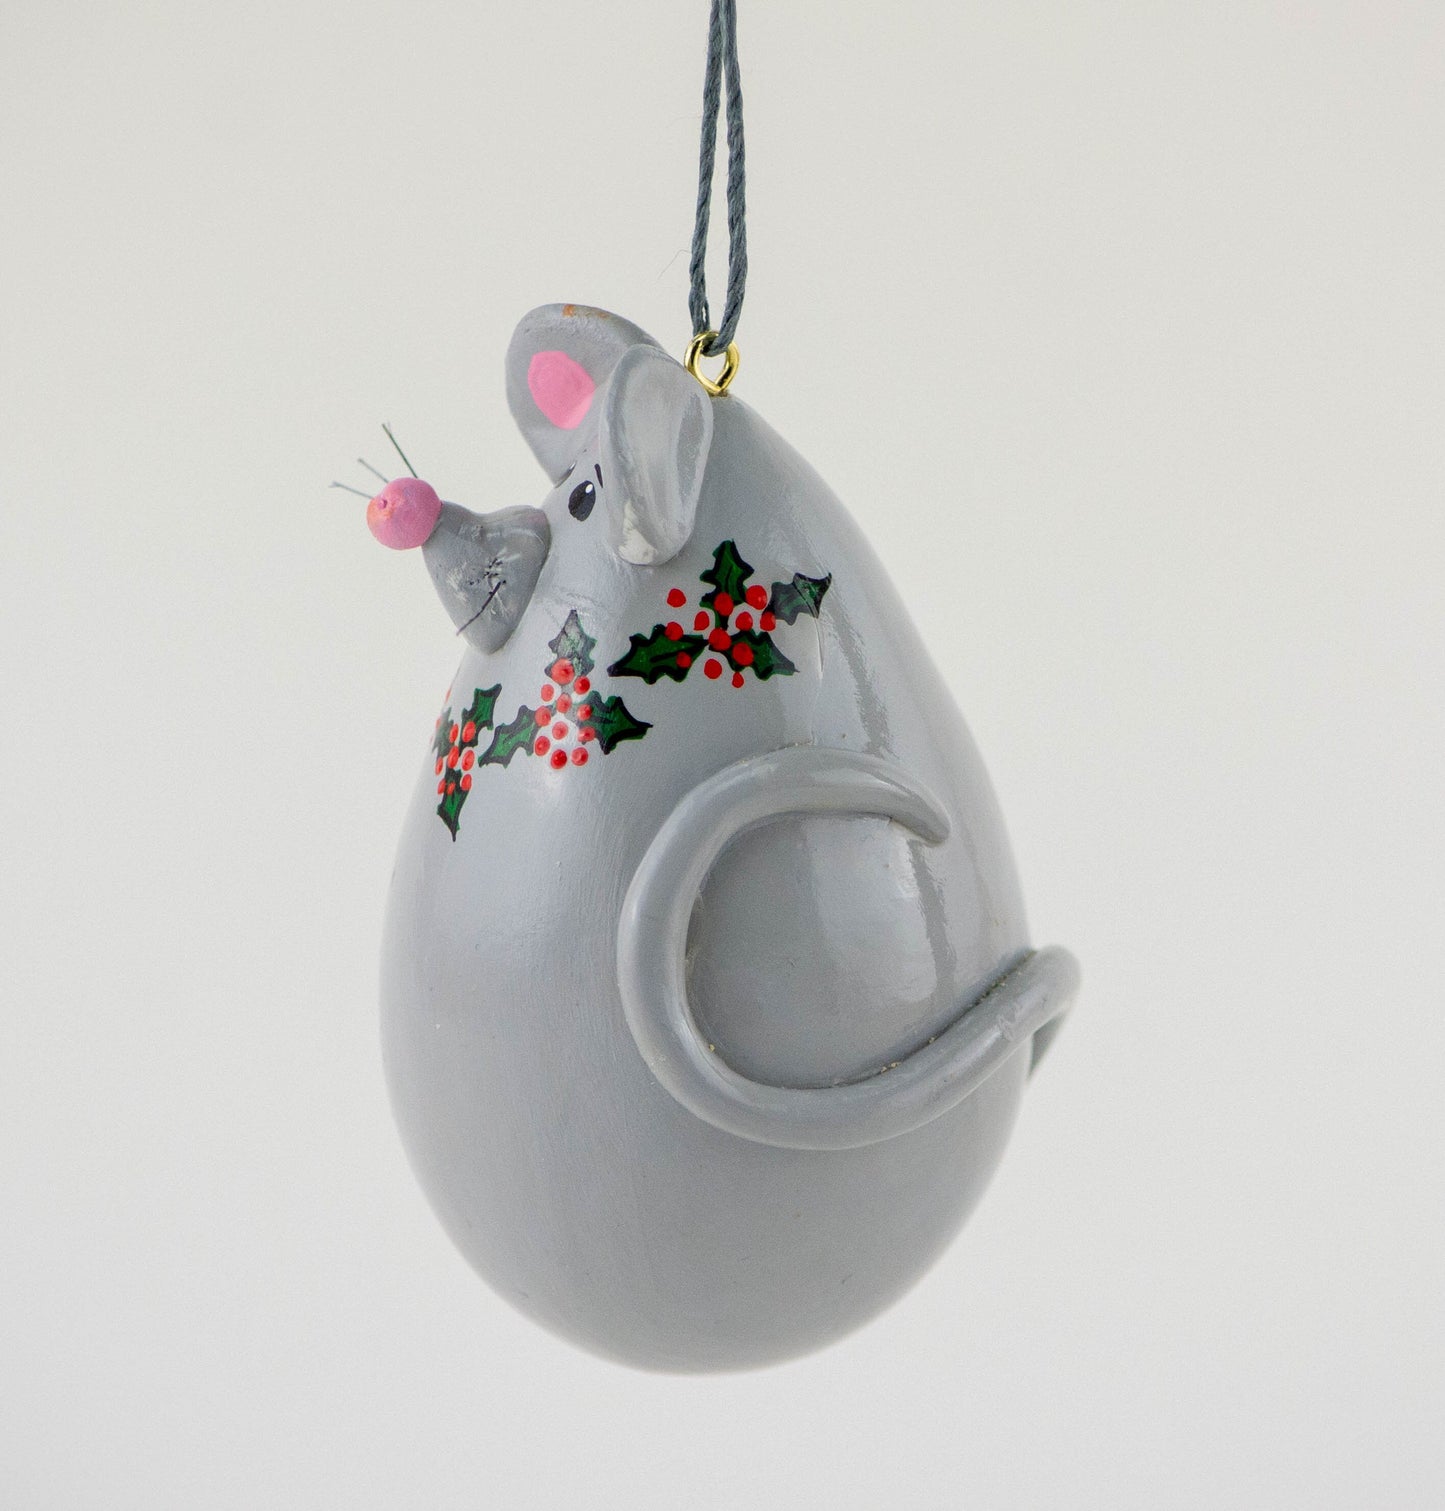 Mouse Ornament Gourd Ornament -  Gray Mouse - Holly Design - Handmade